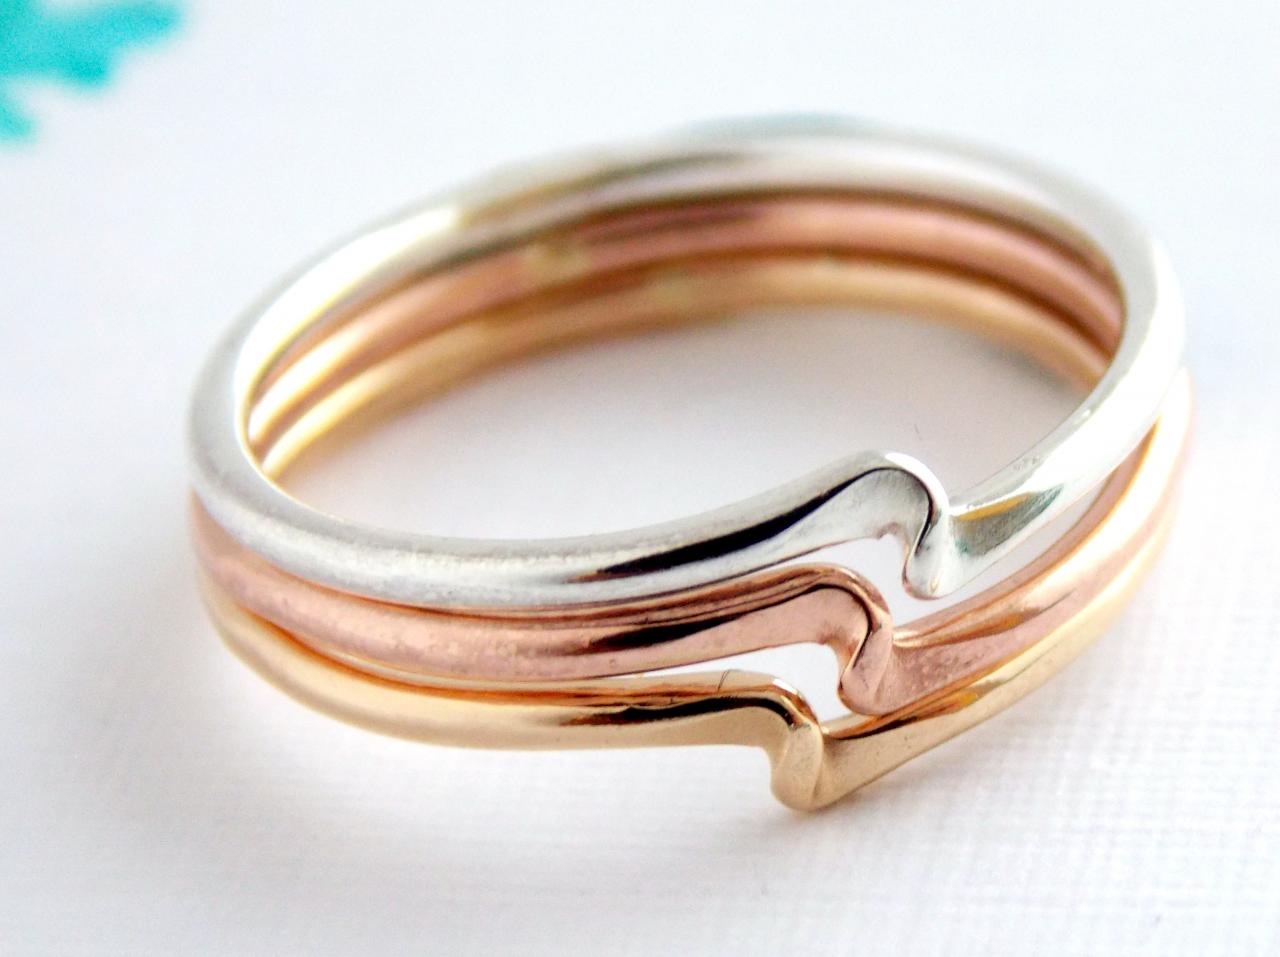 Set of 3 Twister Stacking Rings - 14K Gold-filled ring / dainty ring / simple ring / gold ring / sterling silver ring/ ring set